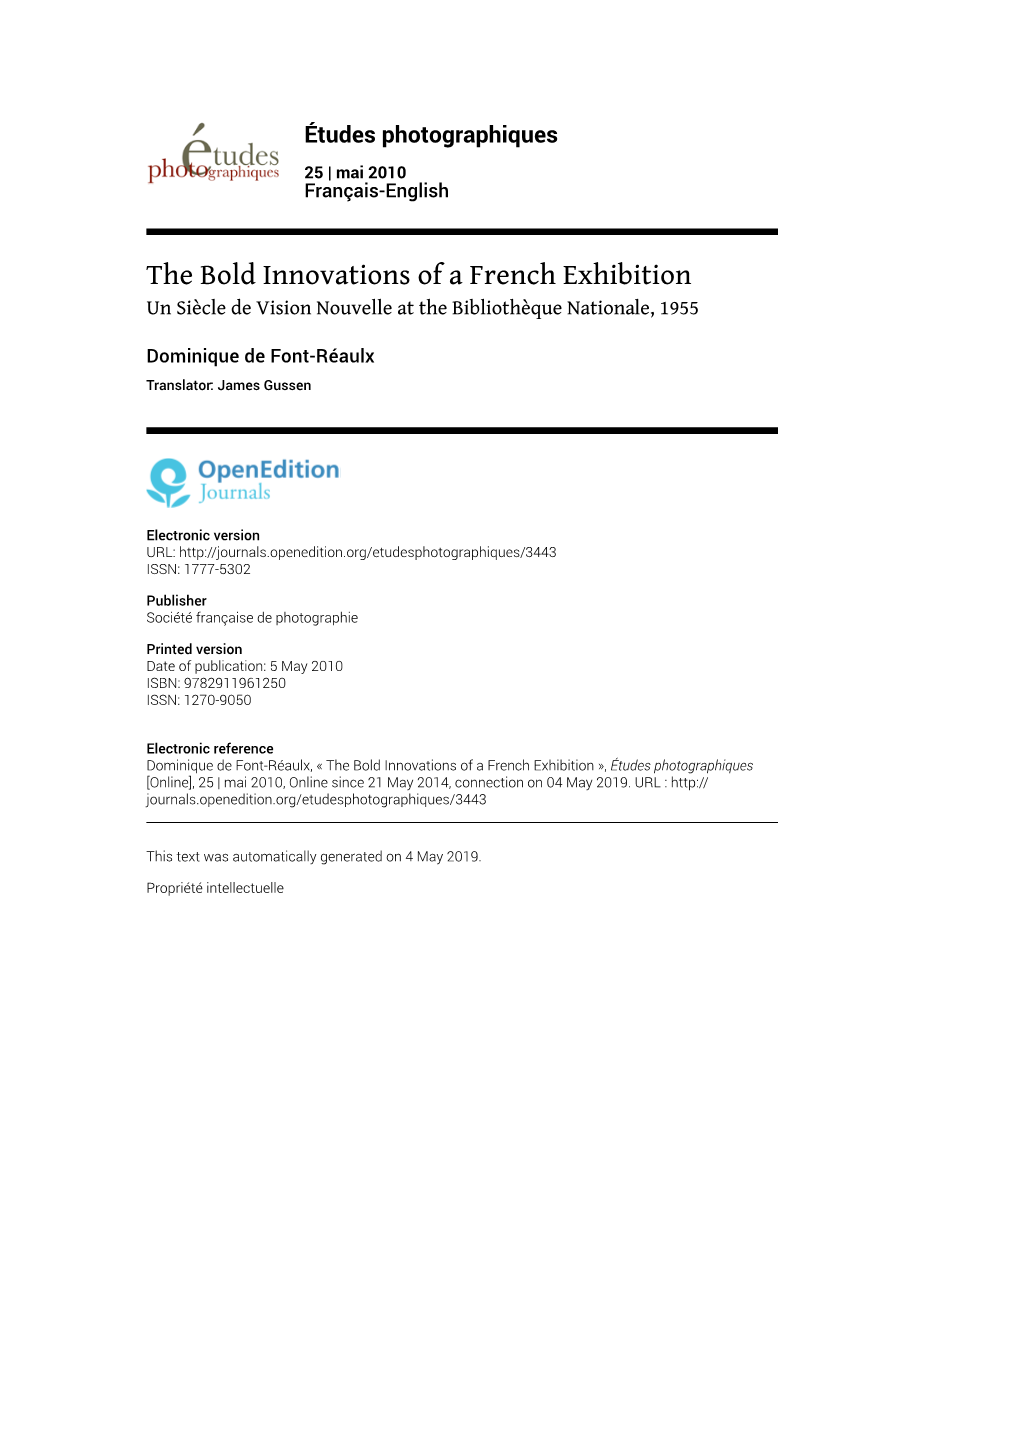 Études Photographiques, 25 | Mai 2010 the Bold Innovations of a French Exhibition 2